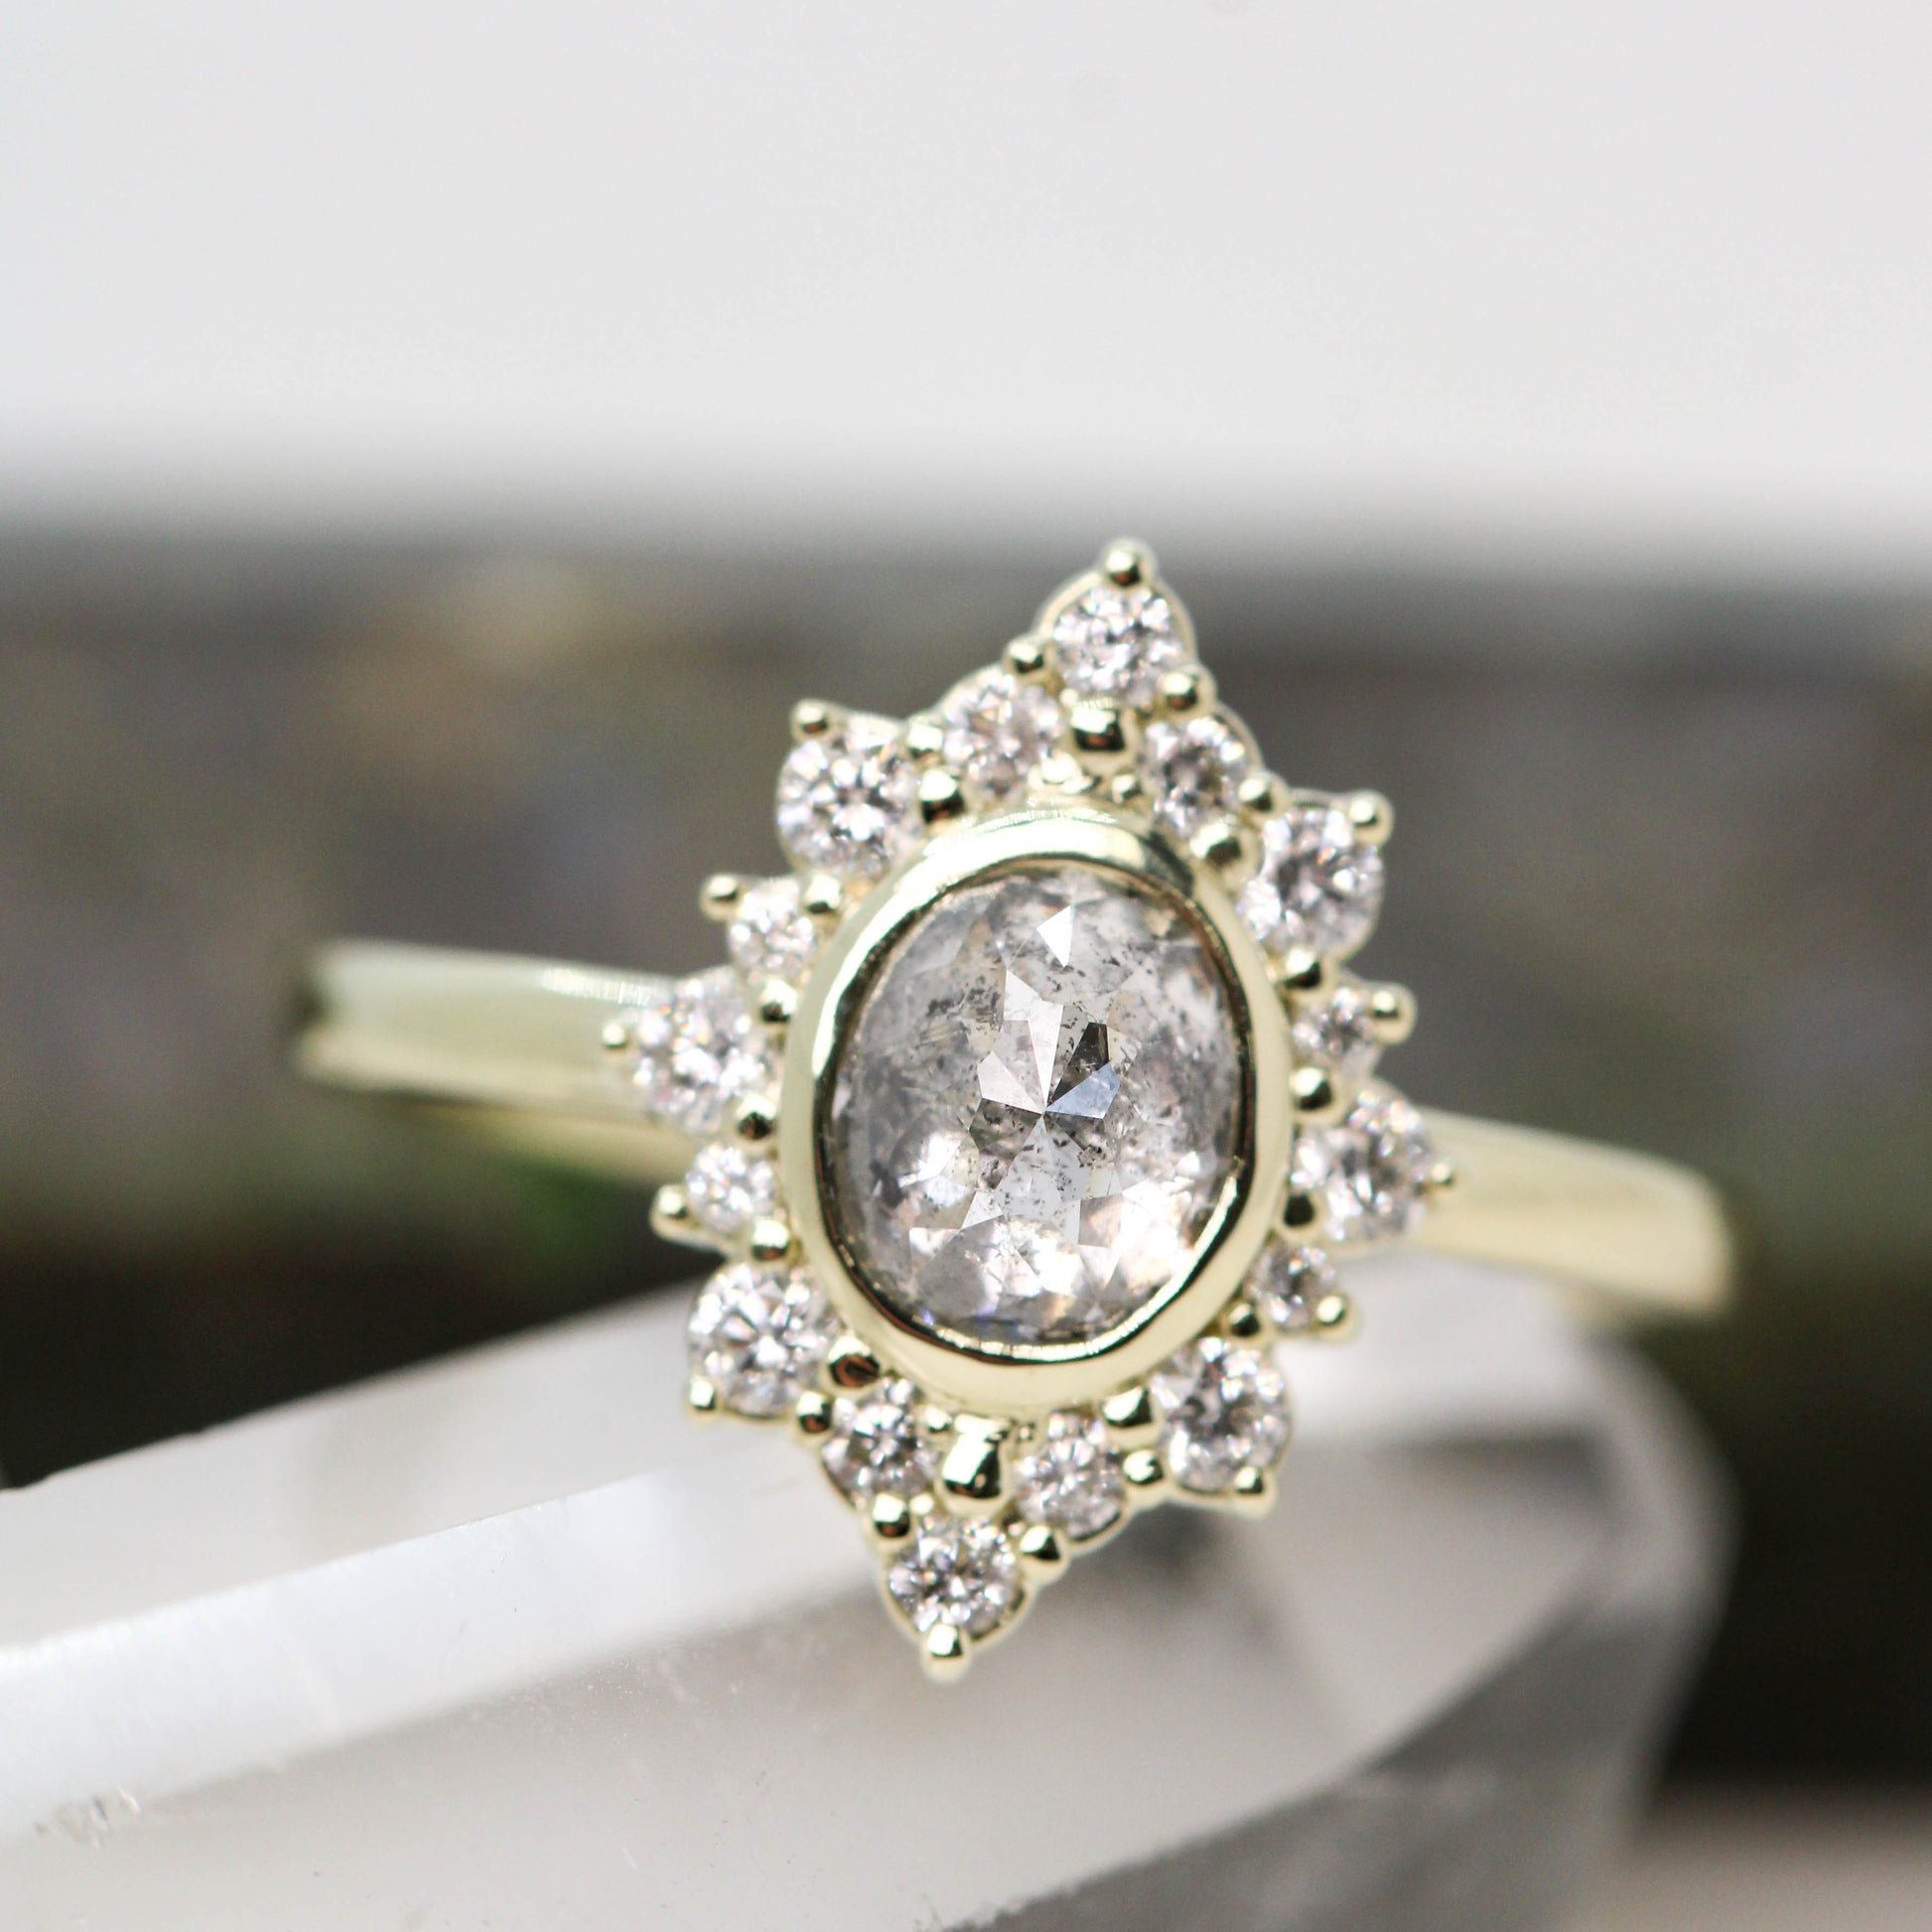 Estrella Ring with a 1.06 Carat Gray Celestial Oval Diamond and White Accent Diamonds in 14k Green Gold - Ready to Size and Ship - Midwinter Co. Alternative Bridal Rings and Modern Fine Jewelry